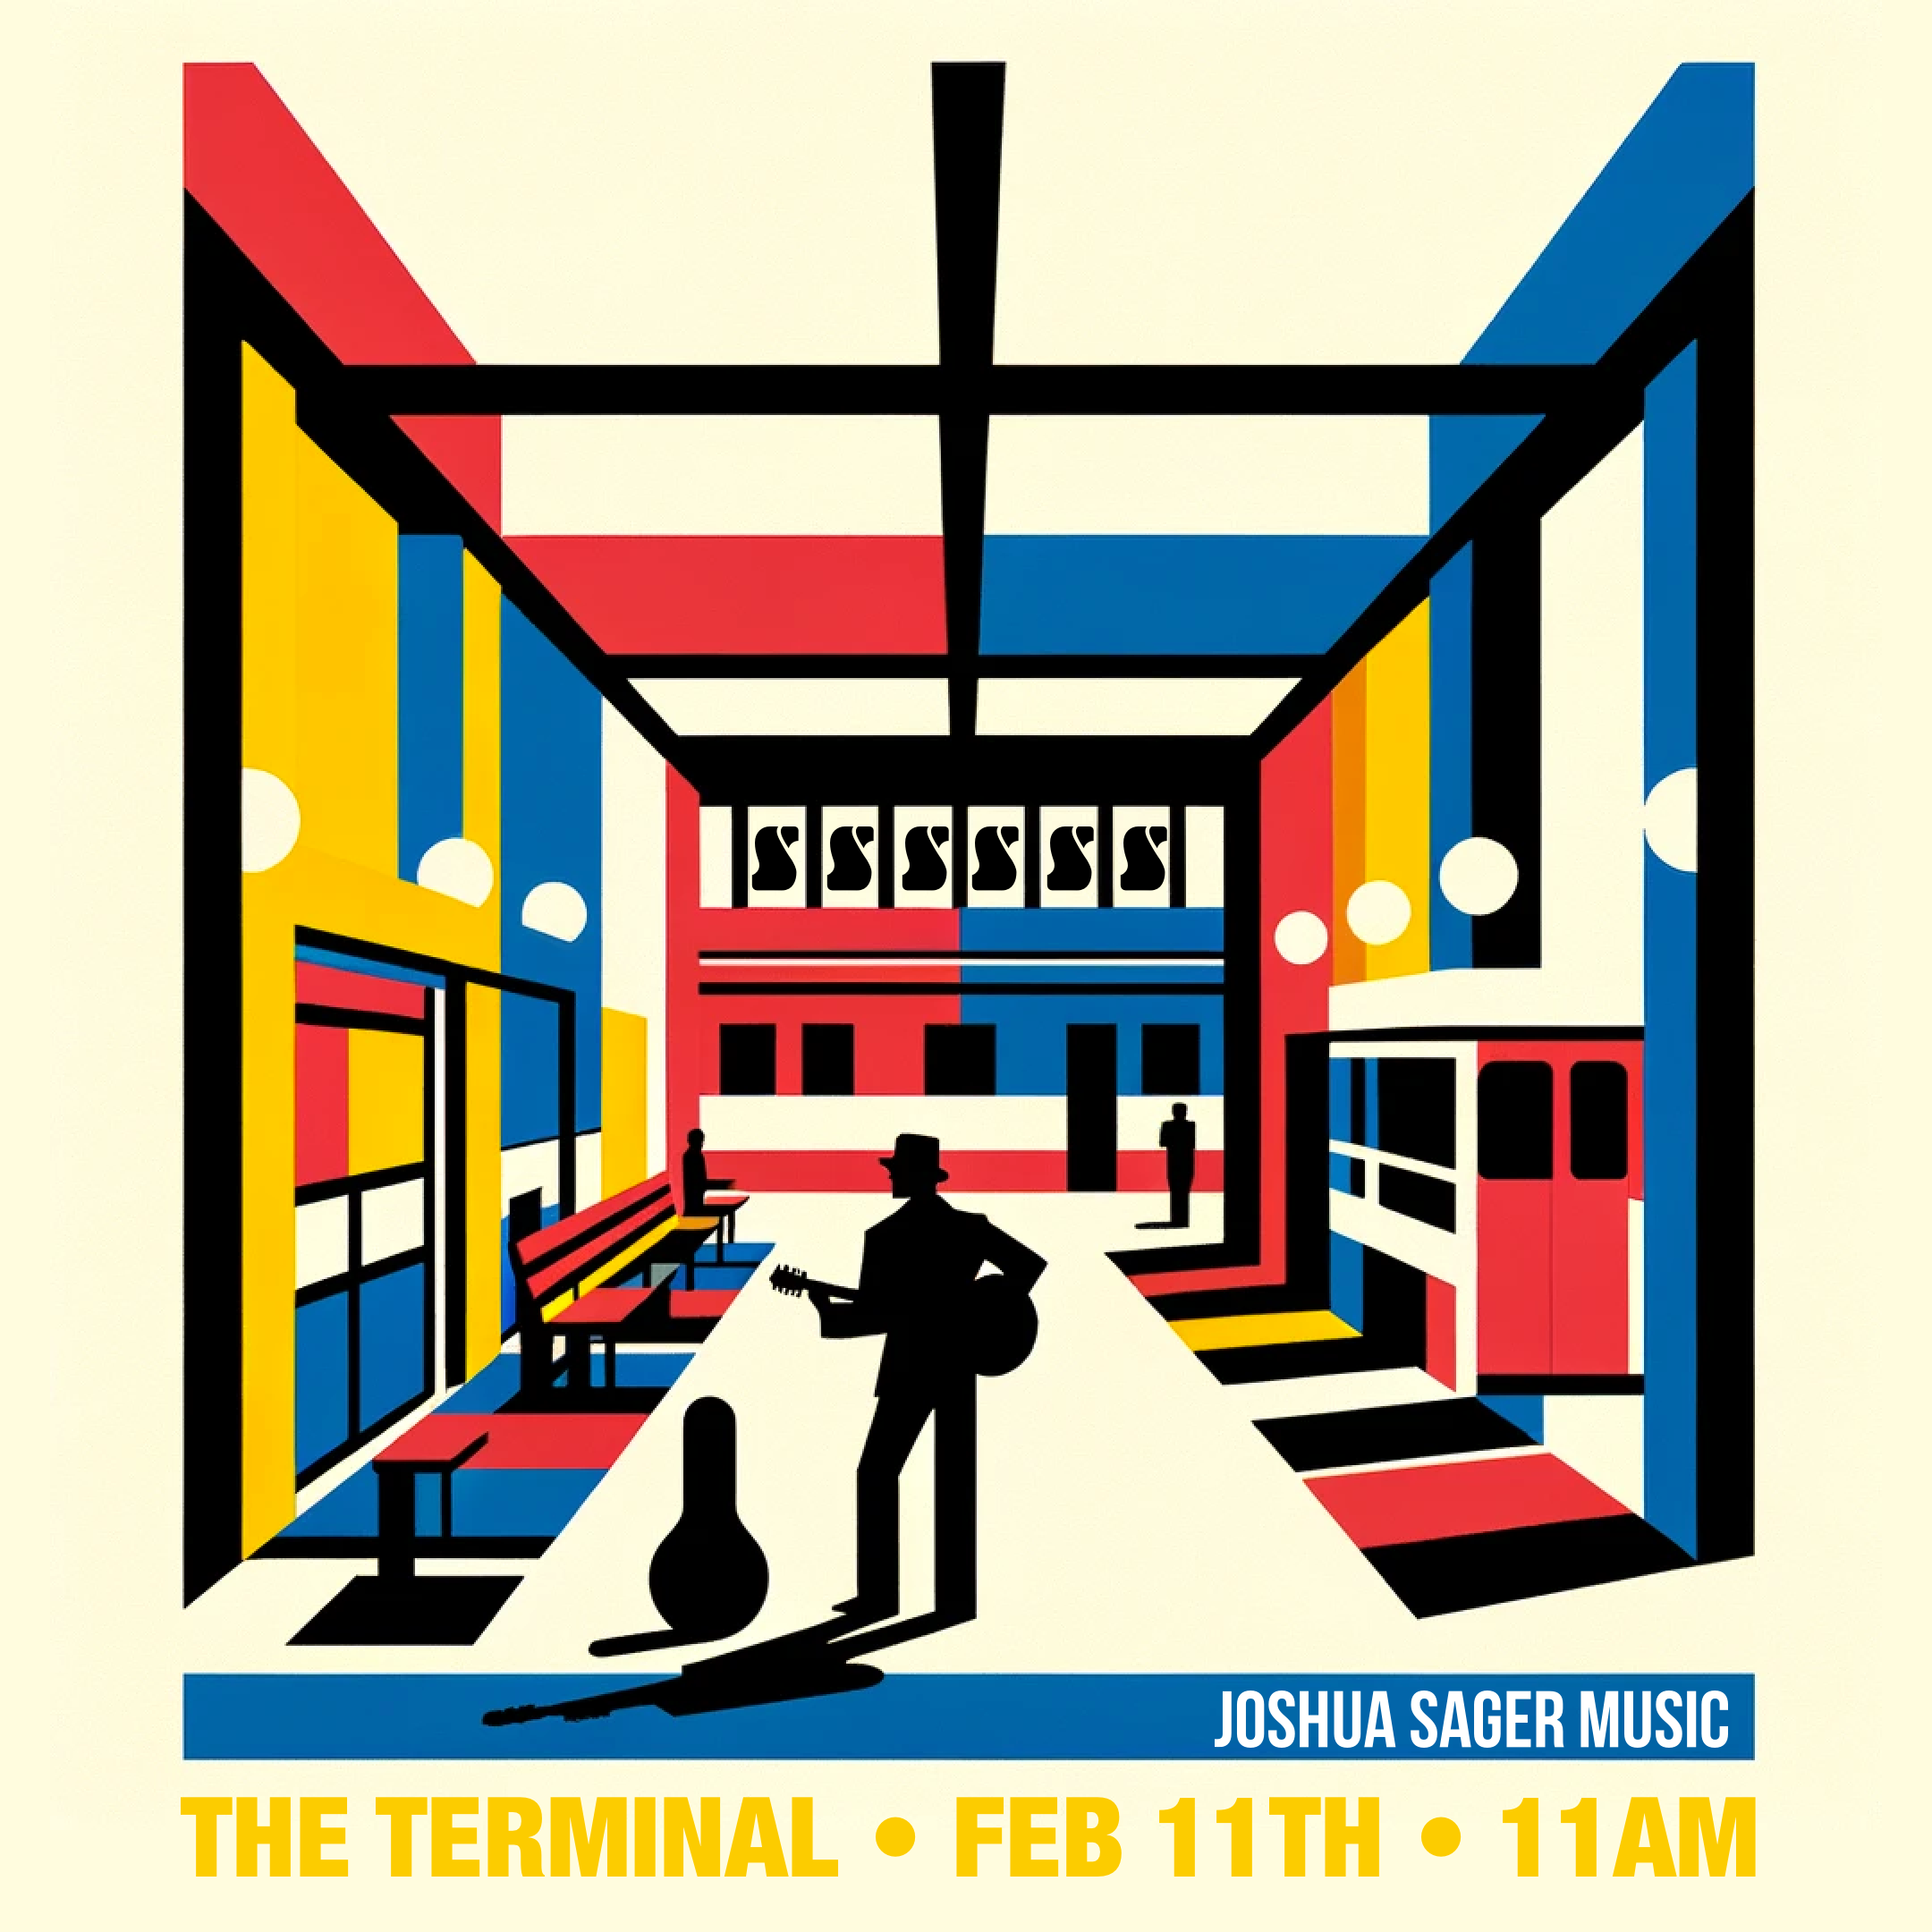 Joshua Sager will be performing at the Terminal on Febuary 11th from 11am - 3pm